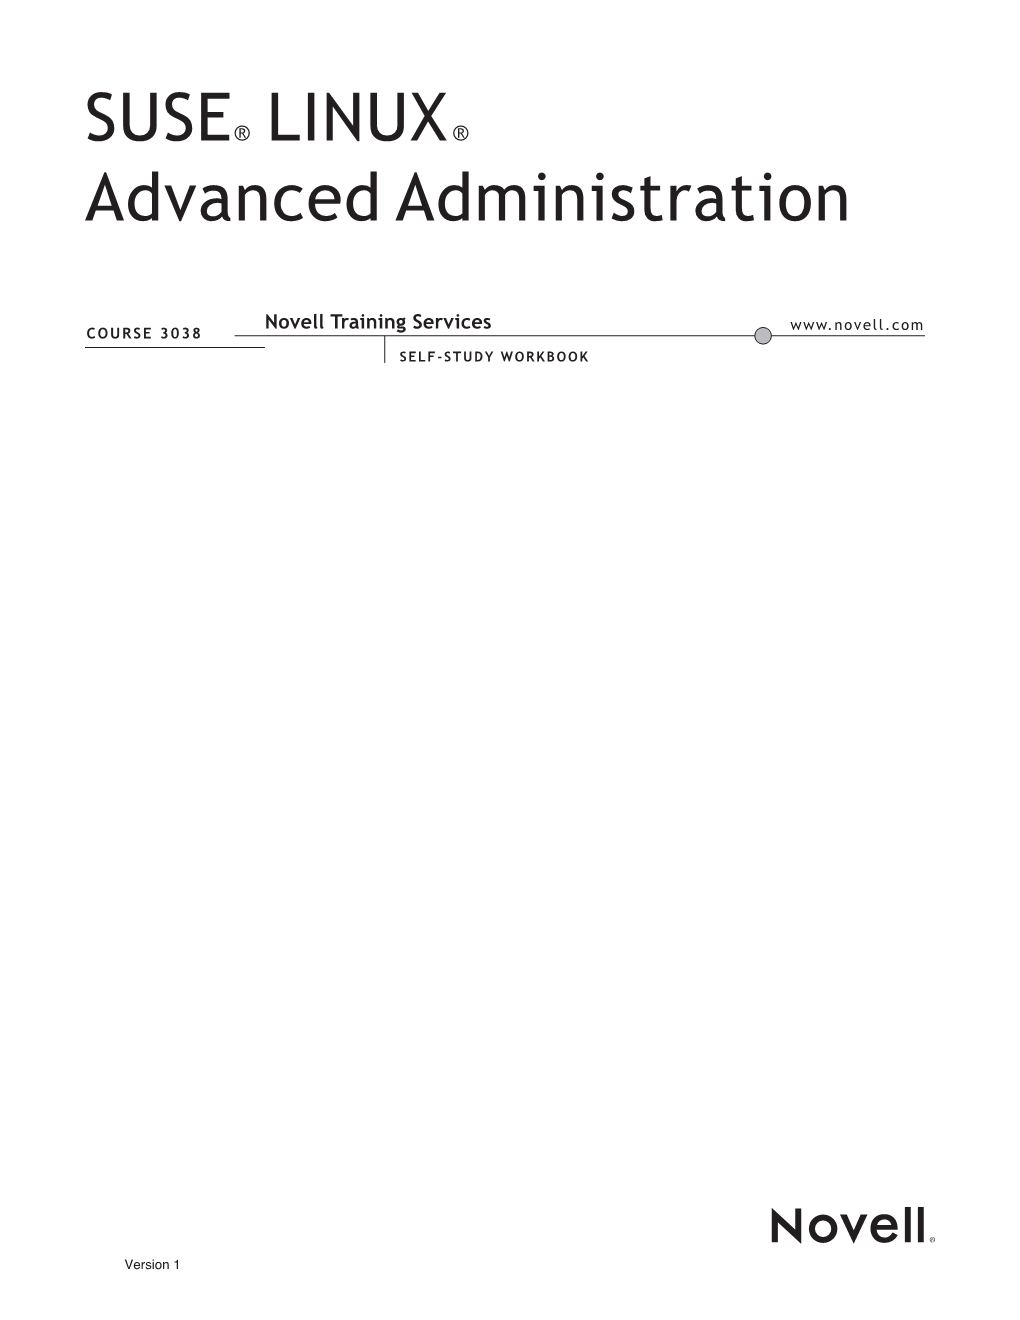 SUSE® LINUX® Advanced Administration